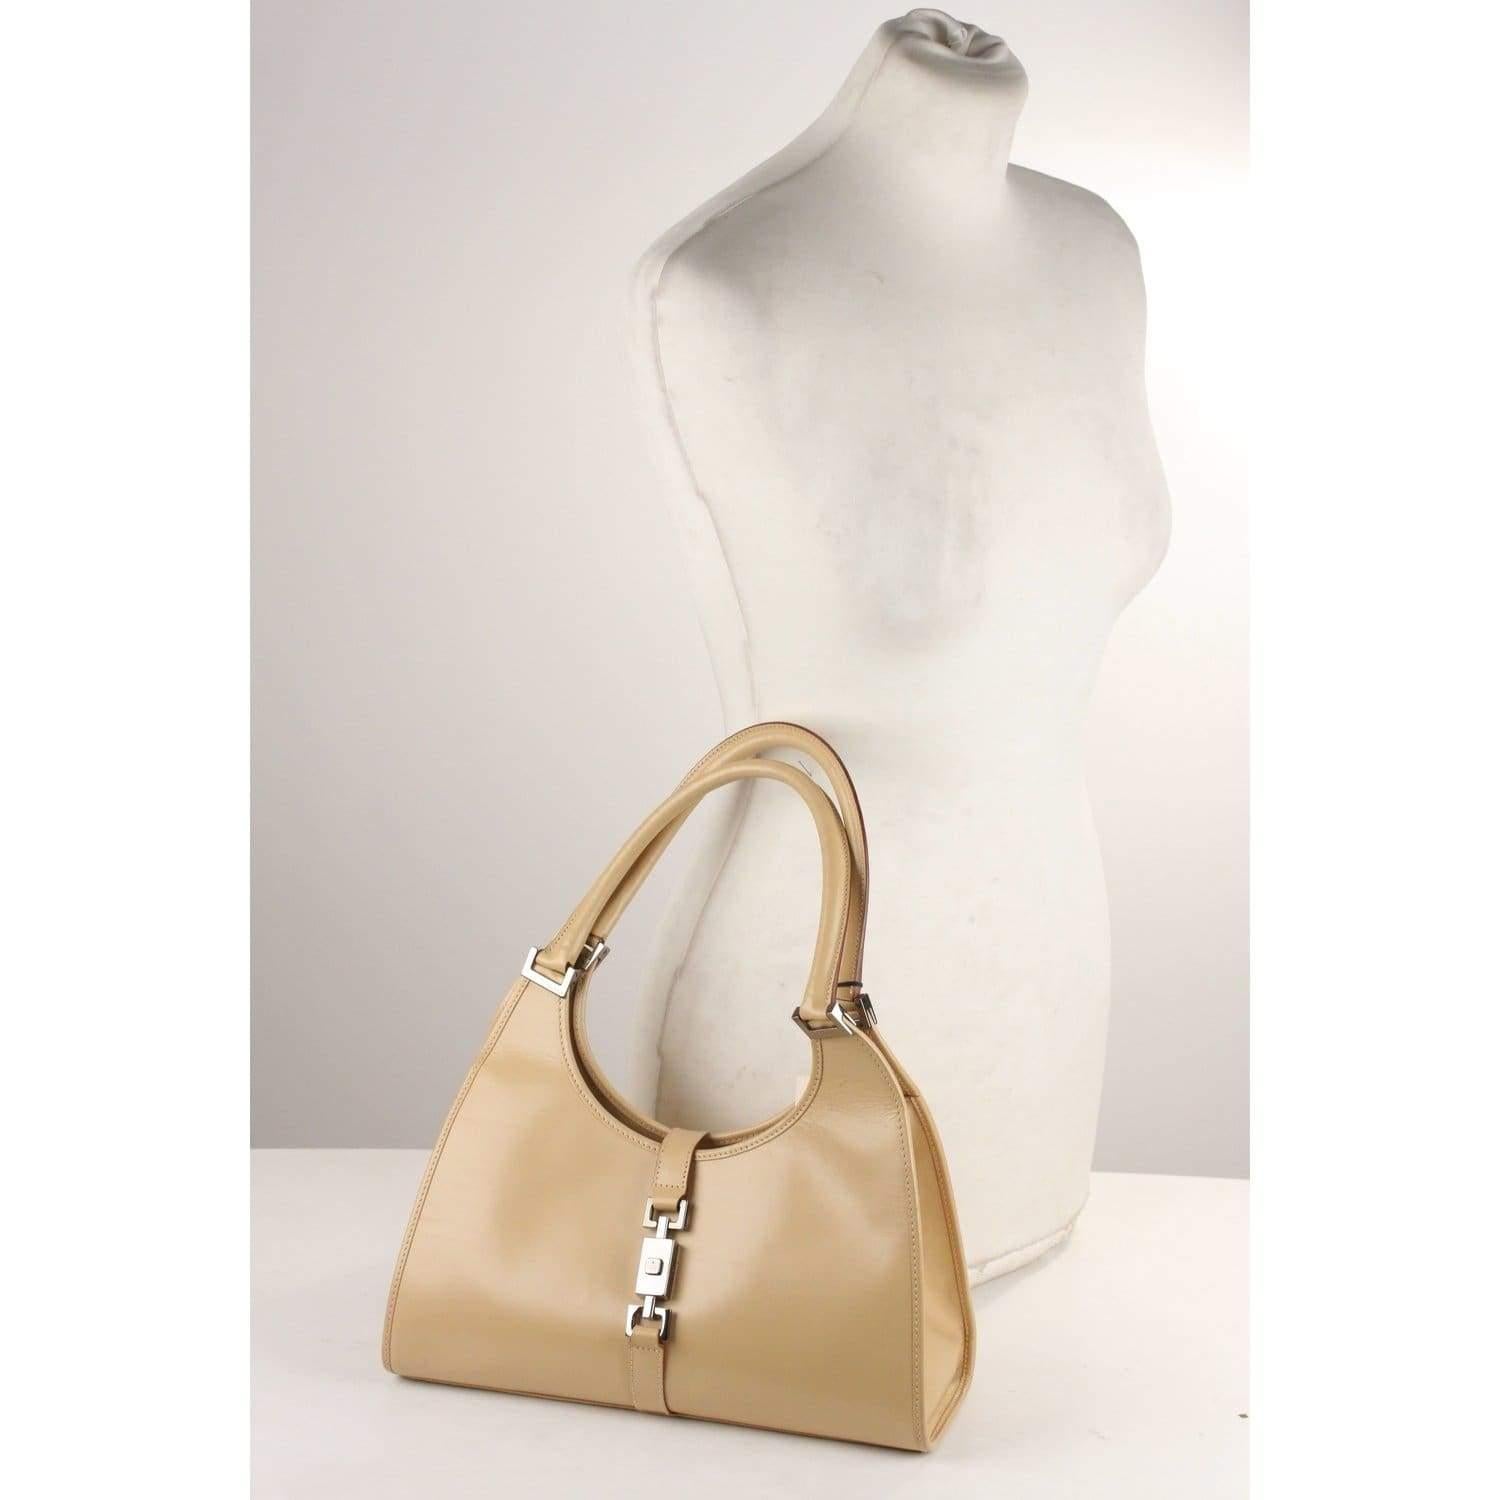 MATERIAL: Leather COLOR: Beige MODEL: Stirrup Hobo GENDER: Women SIZE: Medium Condition CONDITION DETAILS: B :GOOD CONDITION - Some light wear of use - Some light scratches and creases on leather (especially on the bottom), Some wear of use on